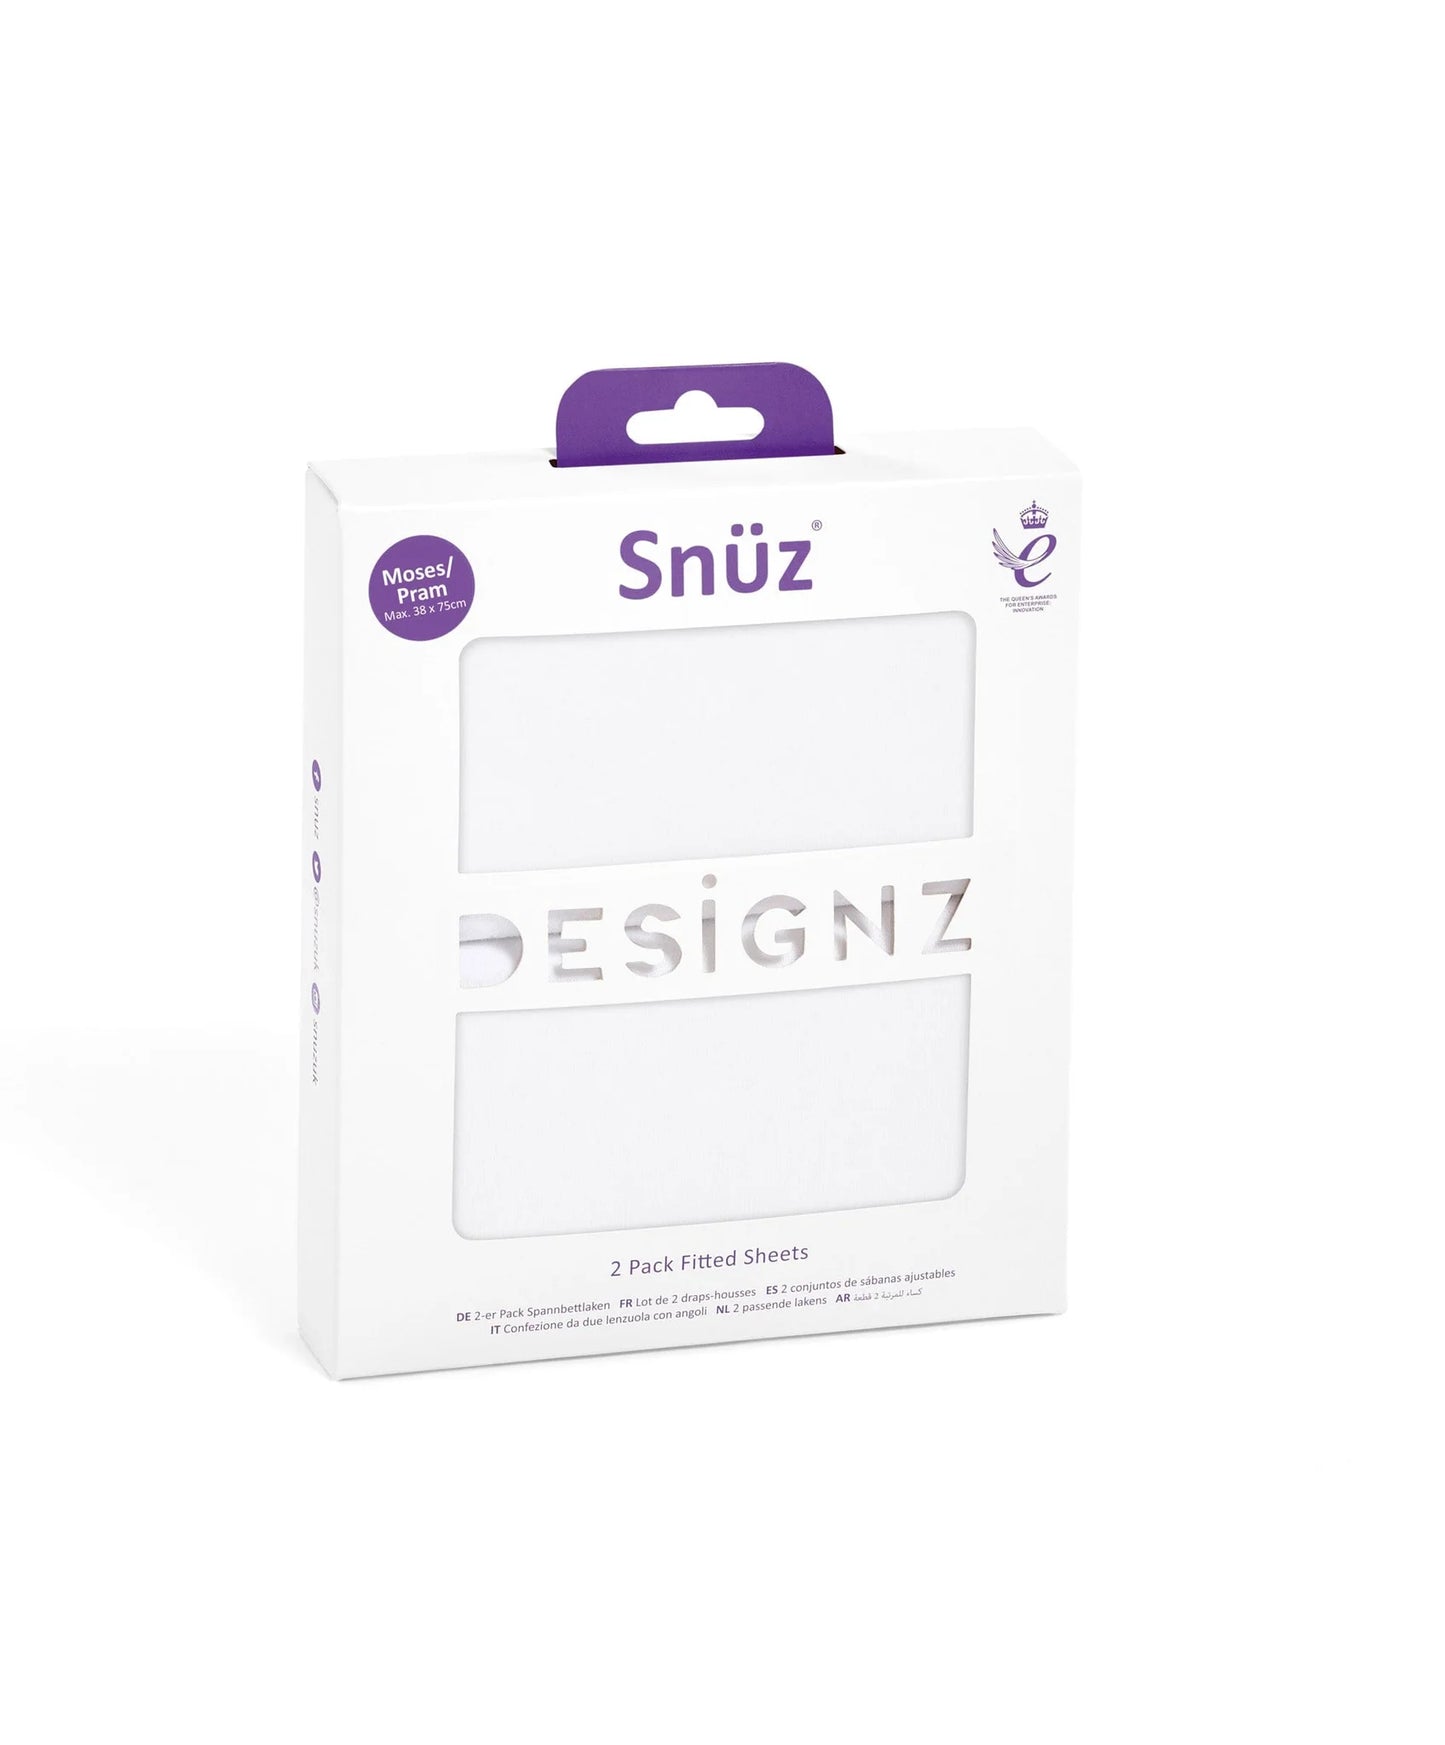 Snuz Moses/Pram Fitted Sheets - 2 Pack